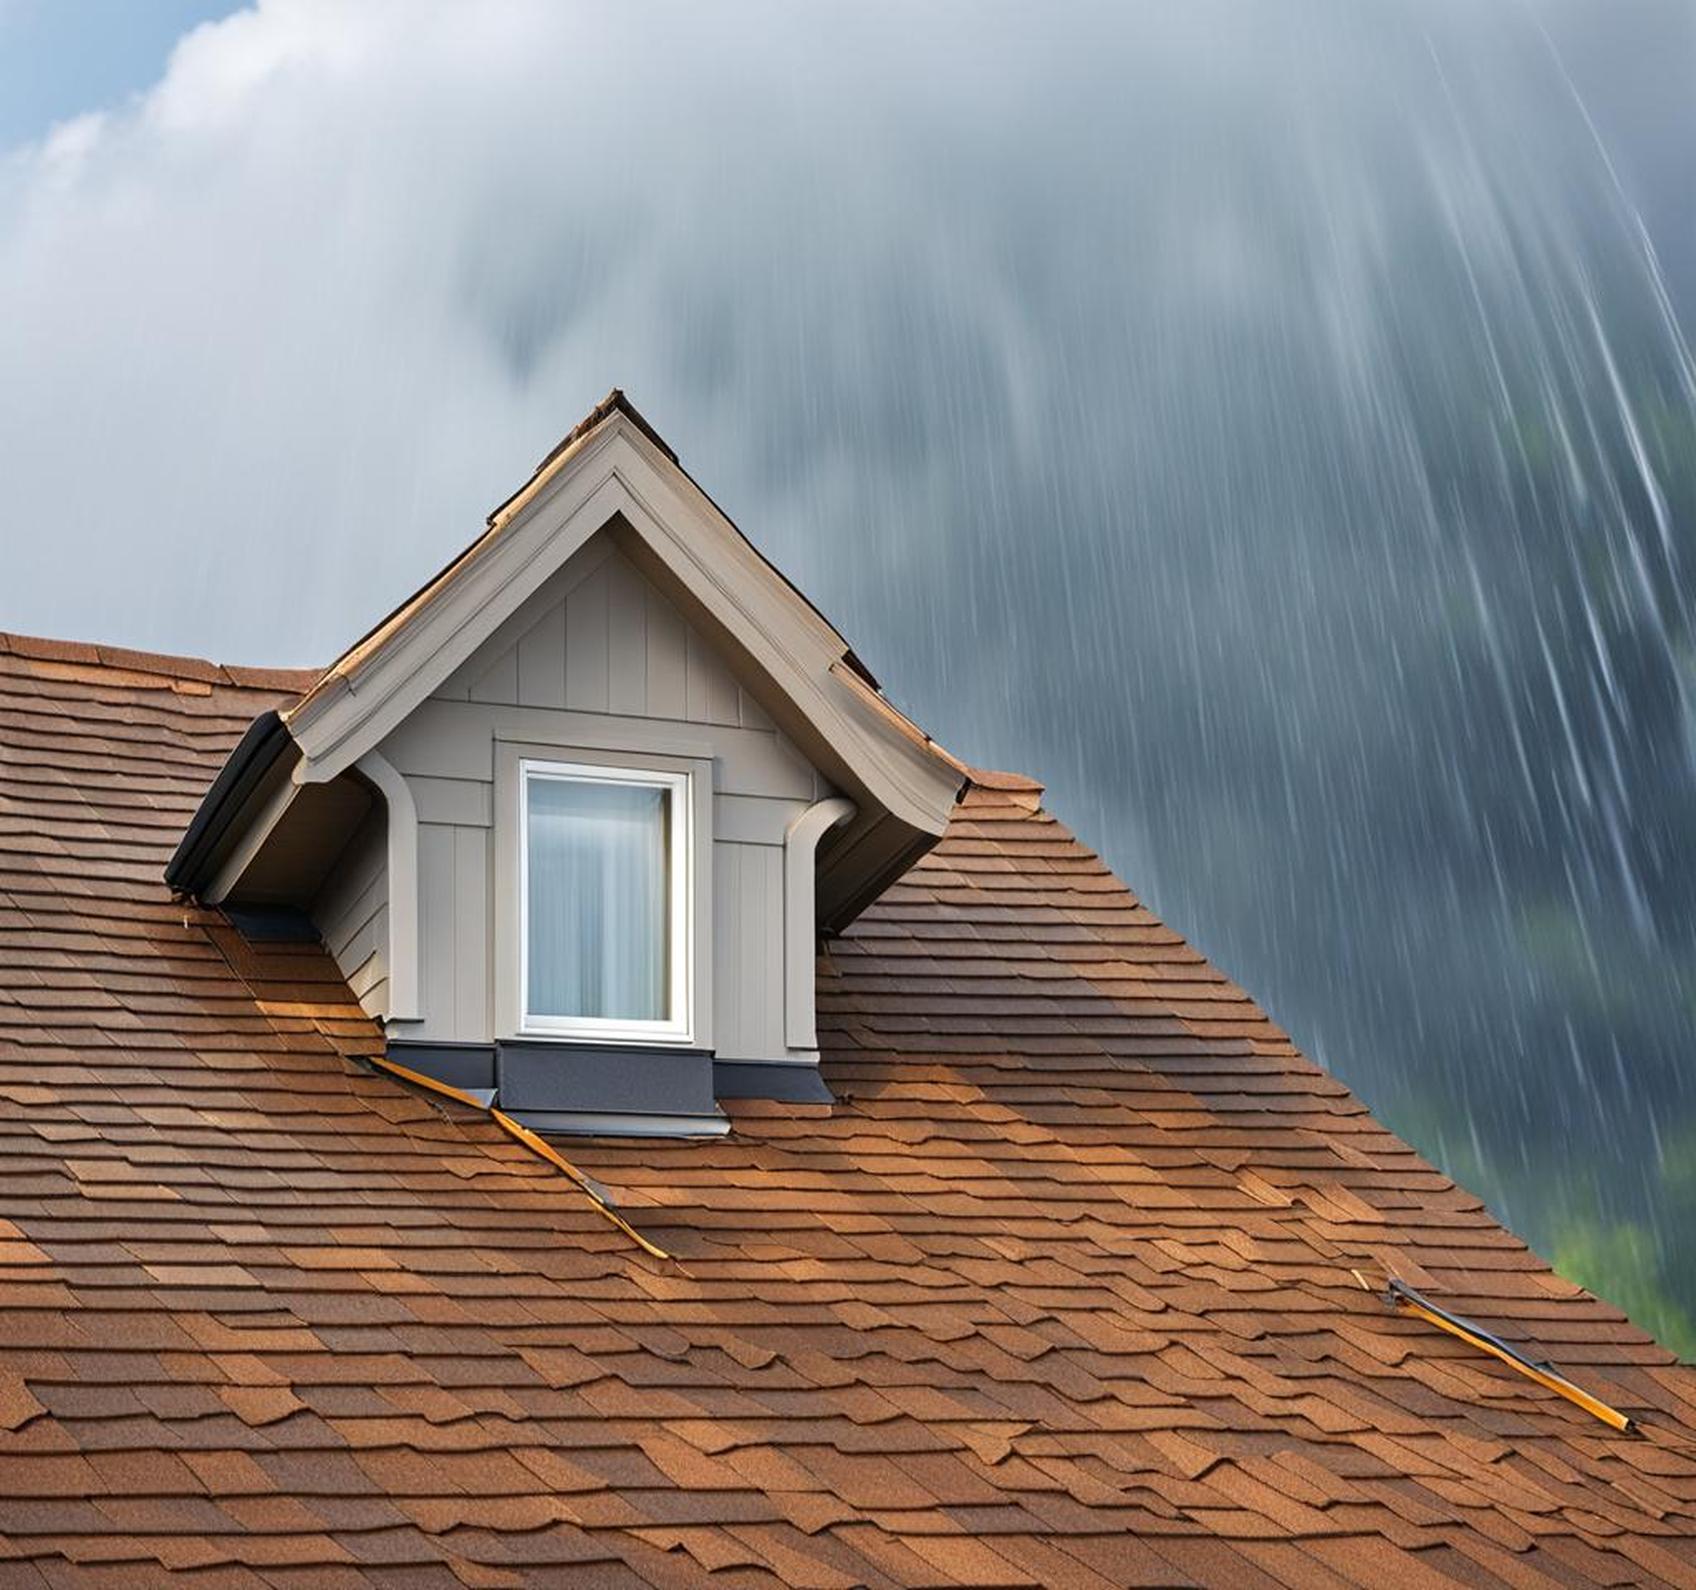 Roof Leaking in Heavy Rain? Fix It Fast With This Guide